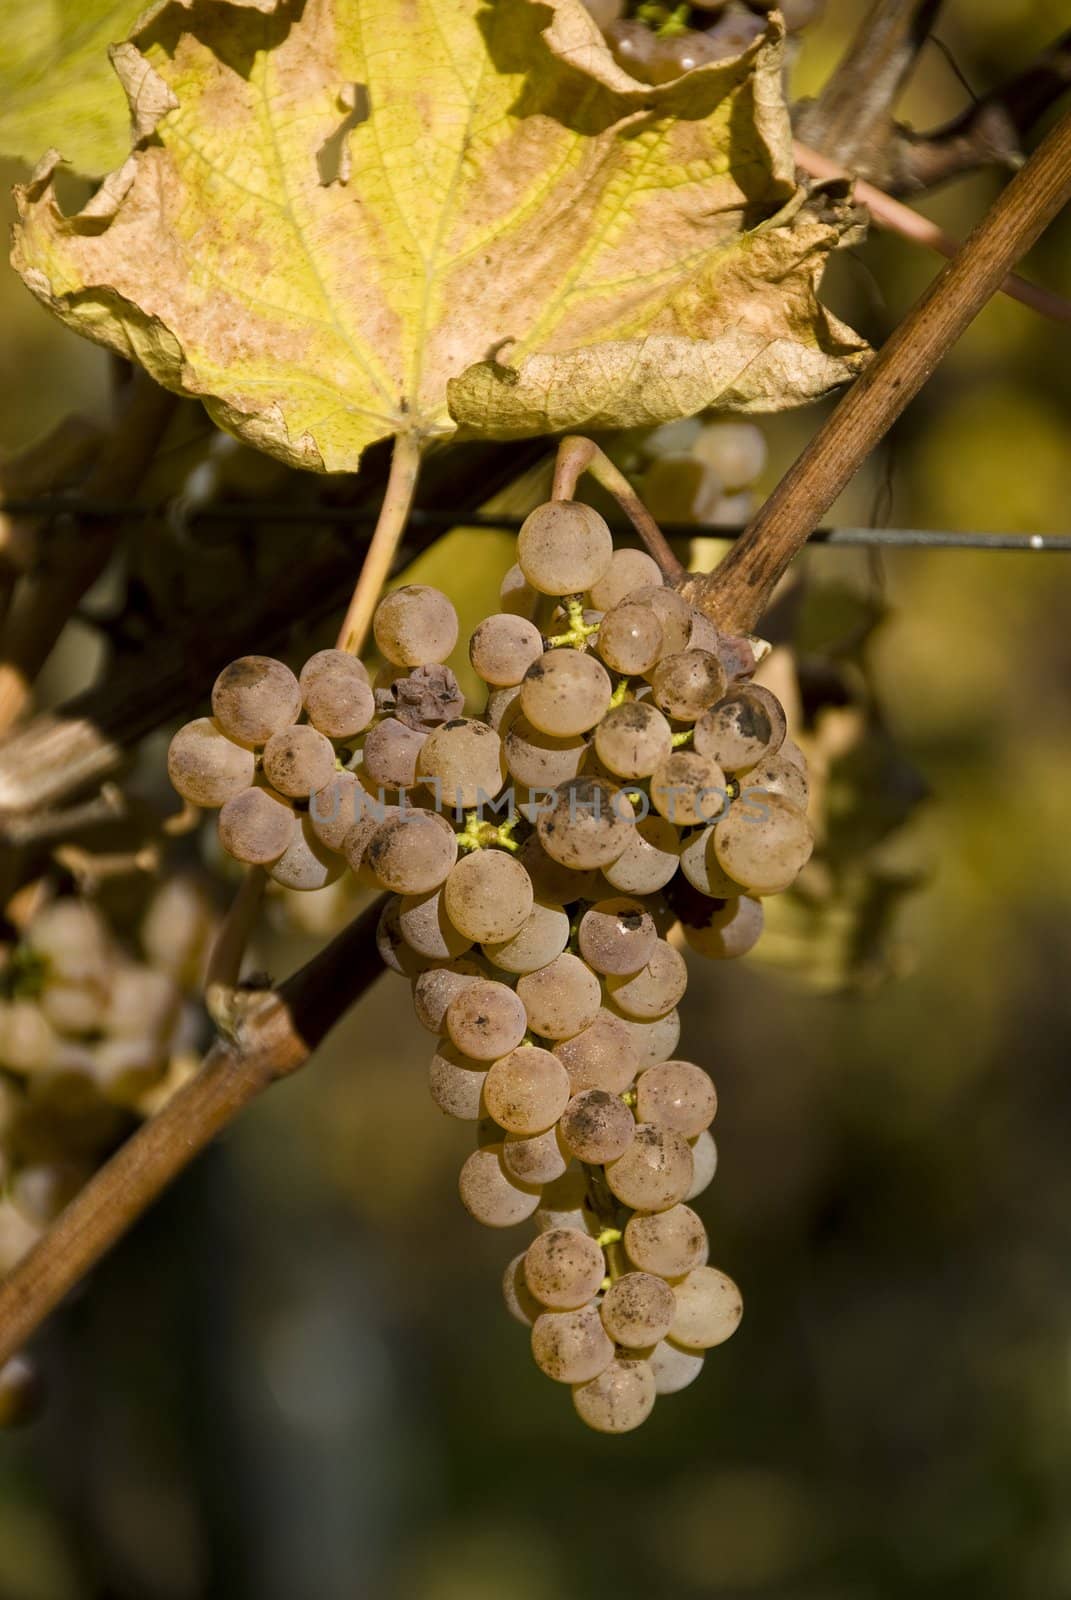 Gros Manseng grapes are used in the making of Jurancon wine in the southwest of France.